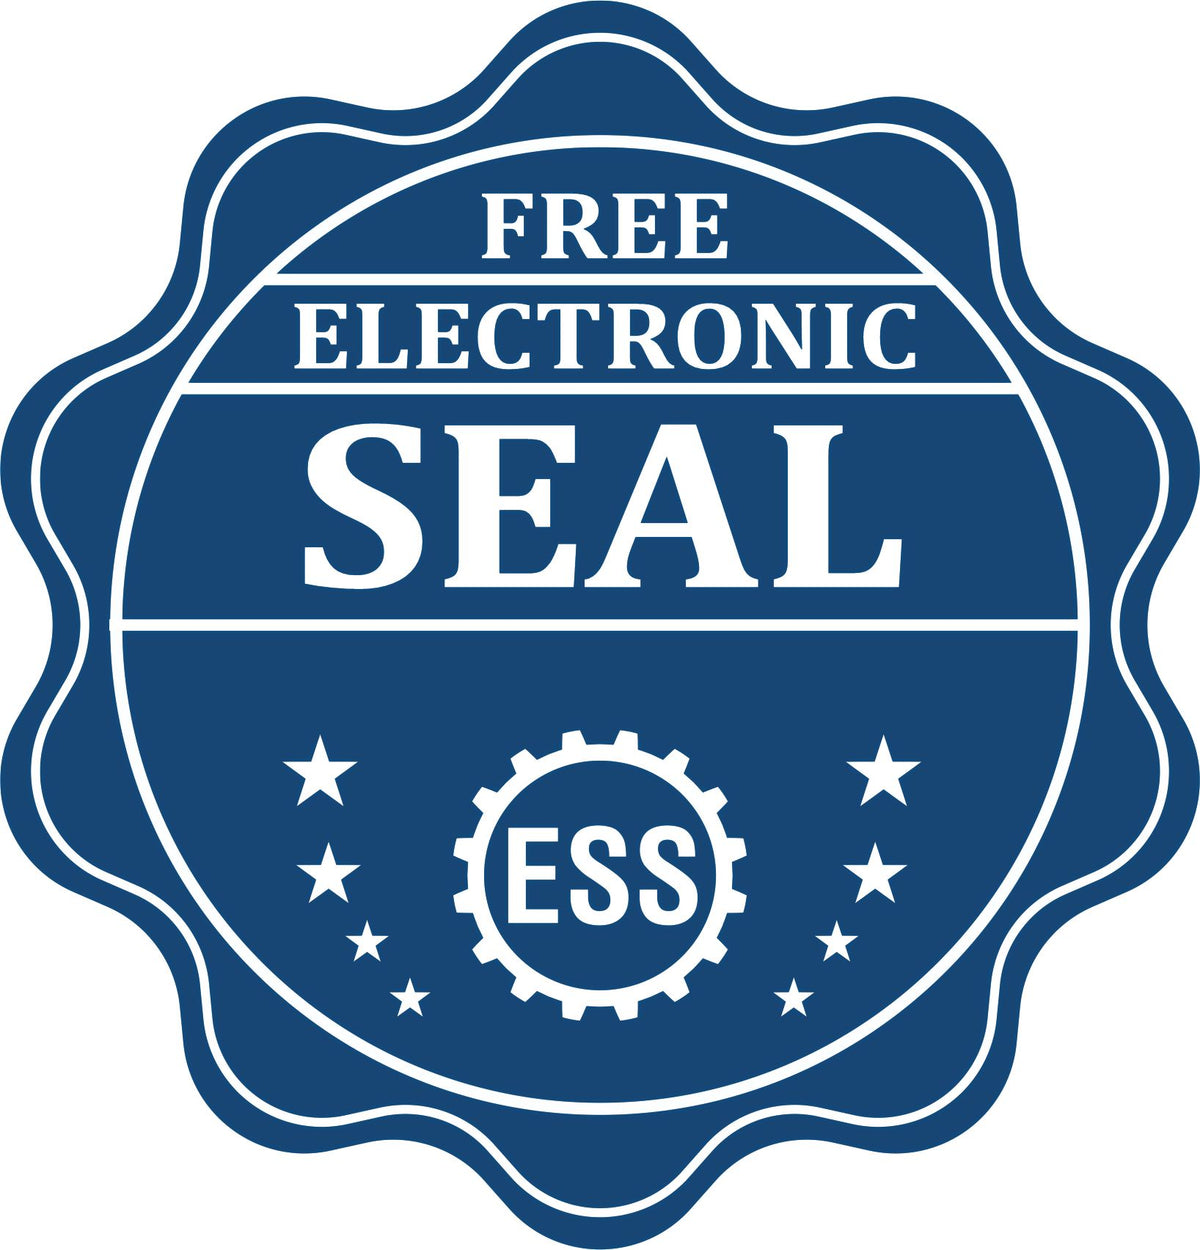 A badge showing a free electronic seal for the Premium MaxLight Pre-Inked New Jersey Landscape Architectural Stamp with stars and the ESS gear on the emblem.